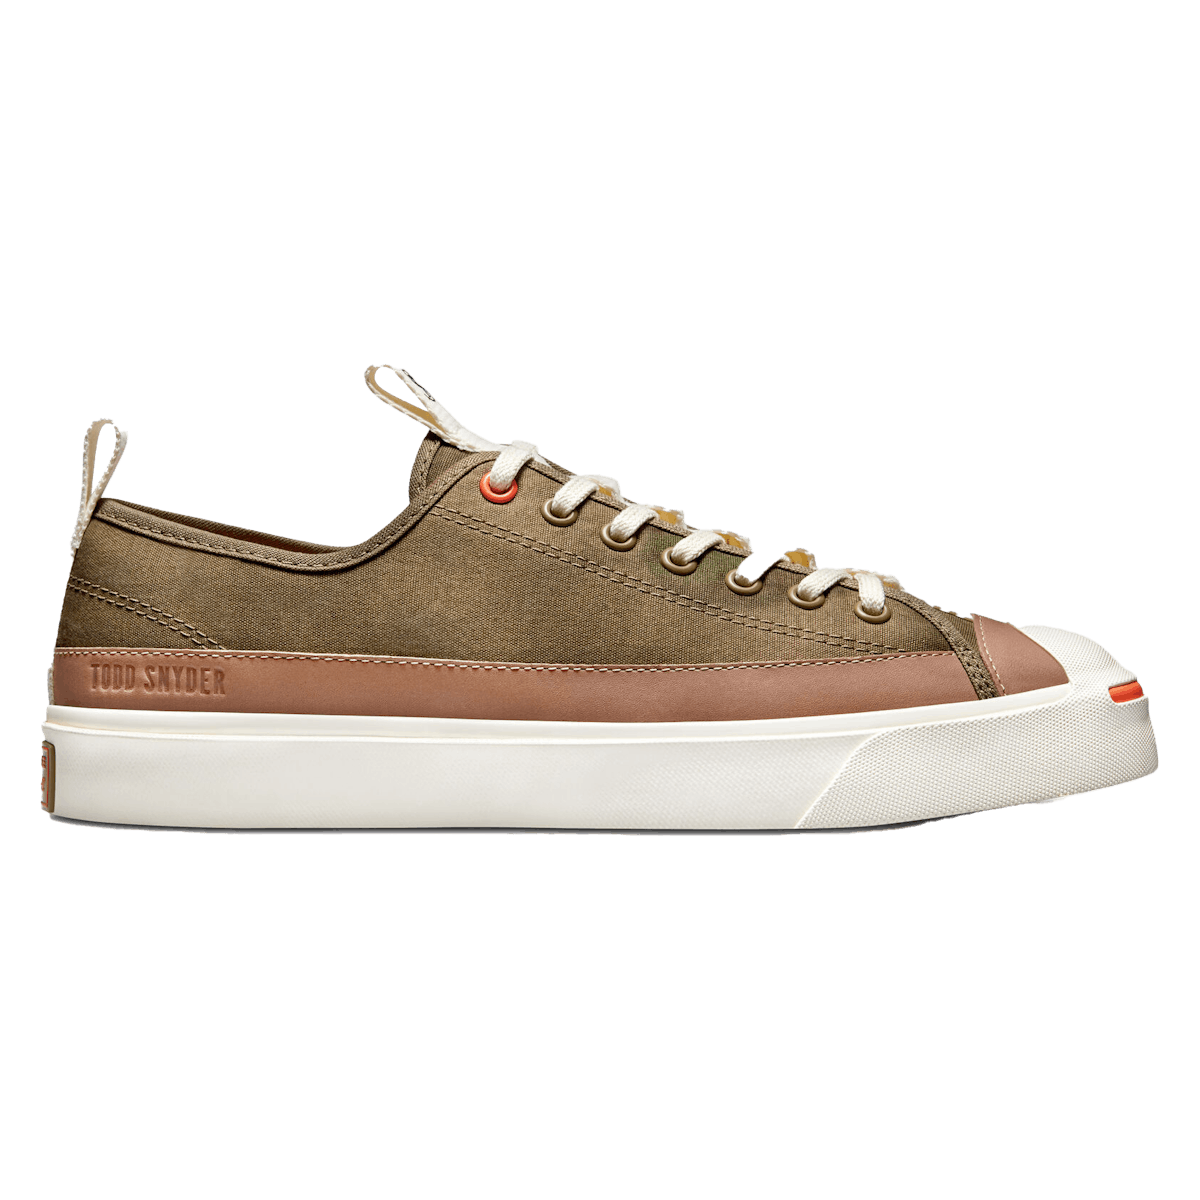 Converse x Todd Snyder Jack Purcell "Champagne Tan"